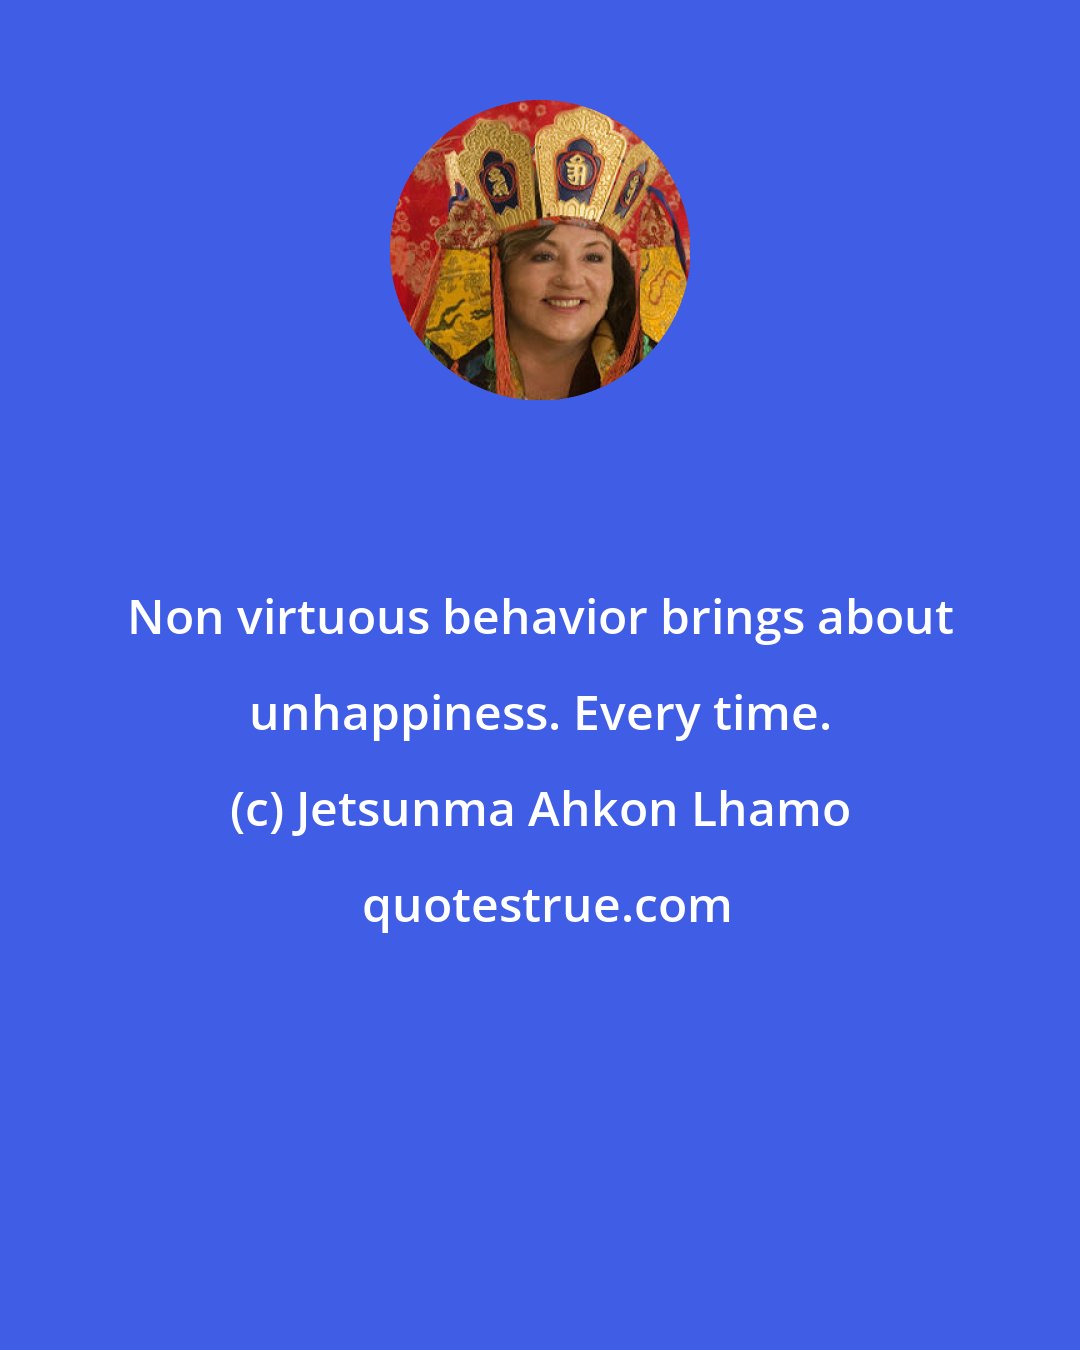 Jetsunma Ahkon Lhamo: Non virtuous behavior brings about unhappiness. Every time.